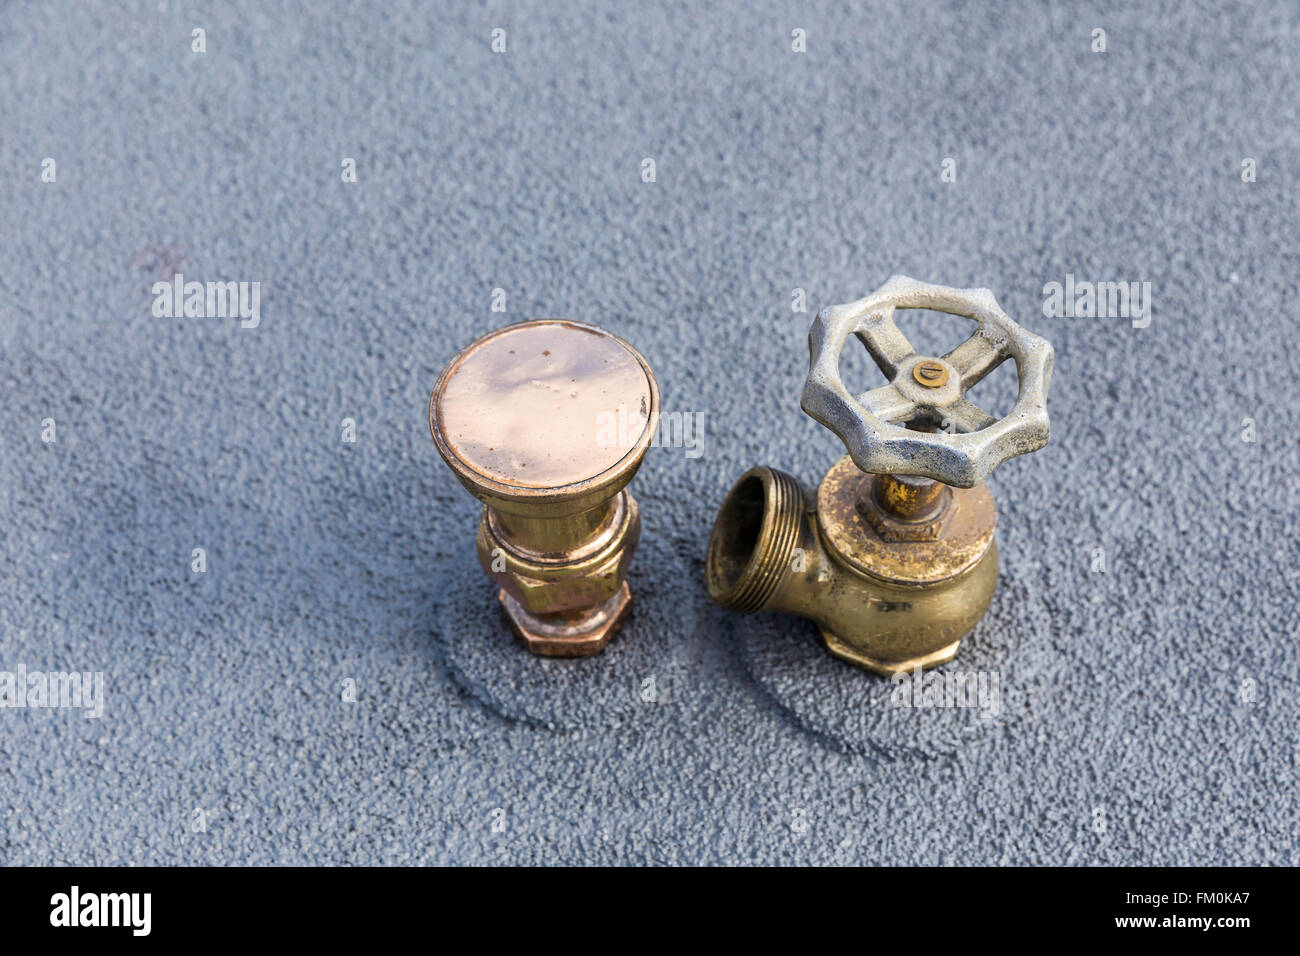 Plumbing copper pipe with a single valve on a grey metal surface background Stock Photo